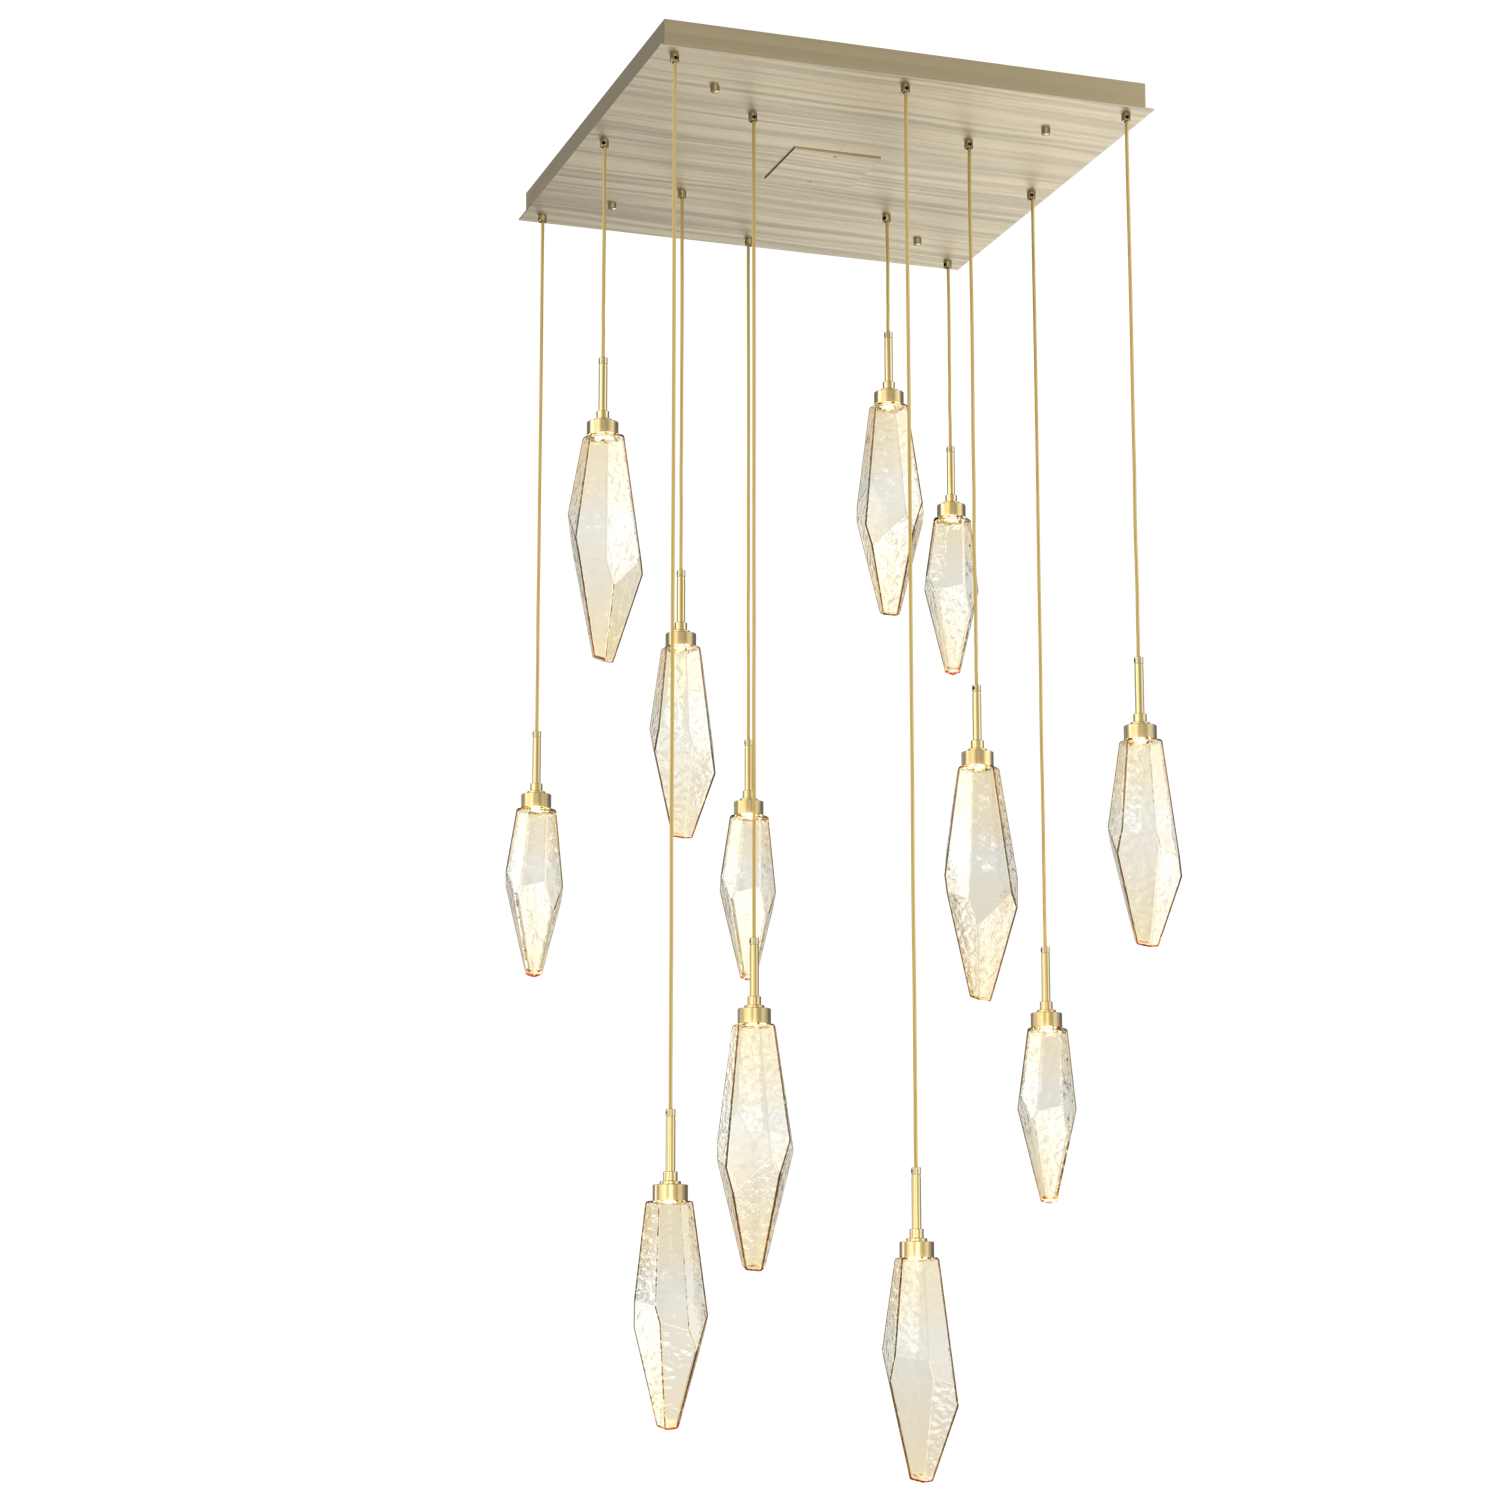 CHB0050-12-HB-CA-Hammerton-Studio-Rock-Crystal-12-light-square-pendant-chandelier-with-heritage-brass-finish-and-chilled-amber-blown-glass-shades-and-LED-lamping